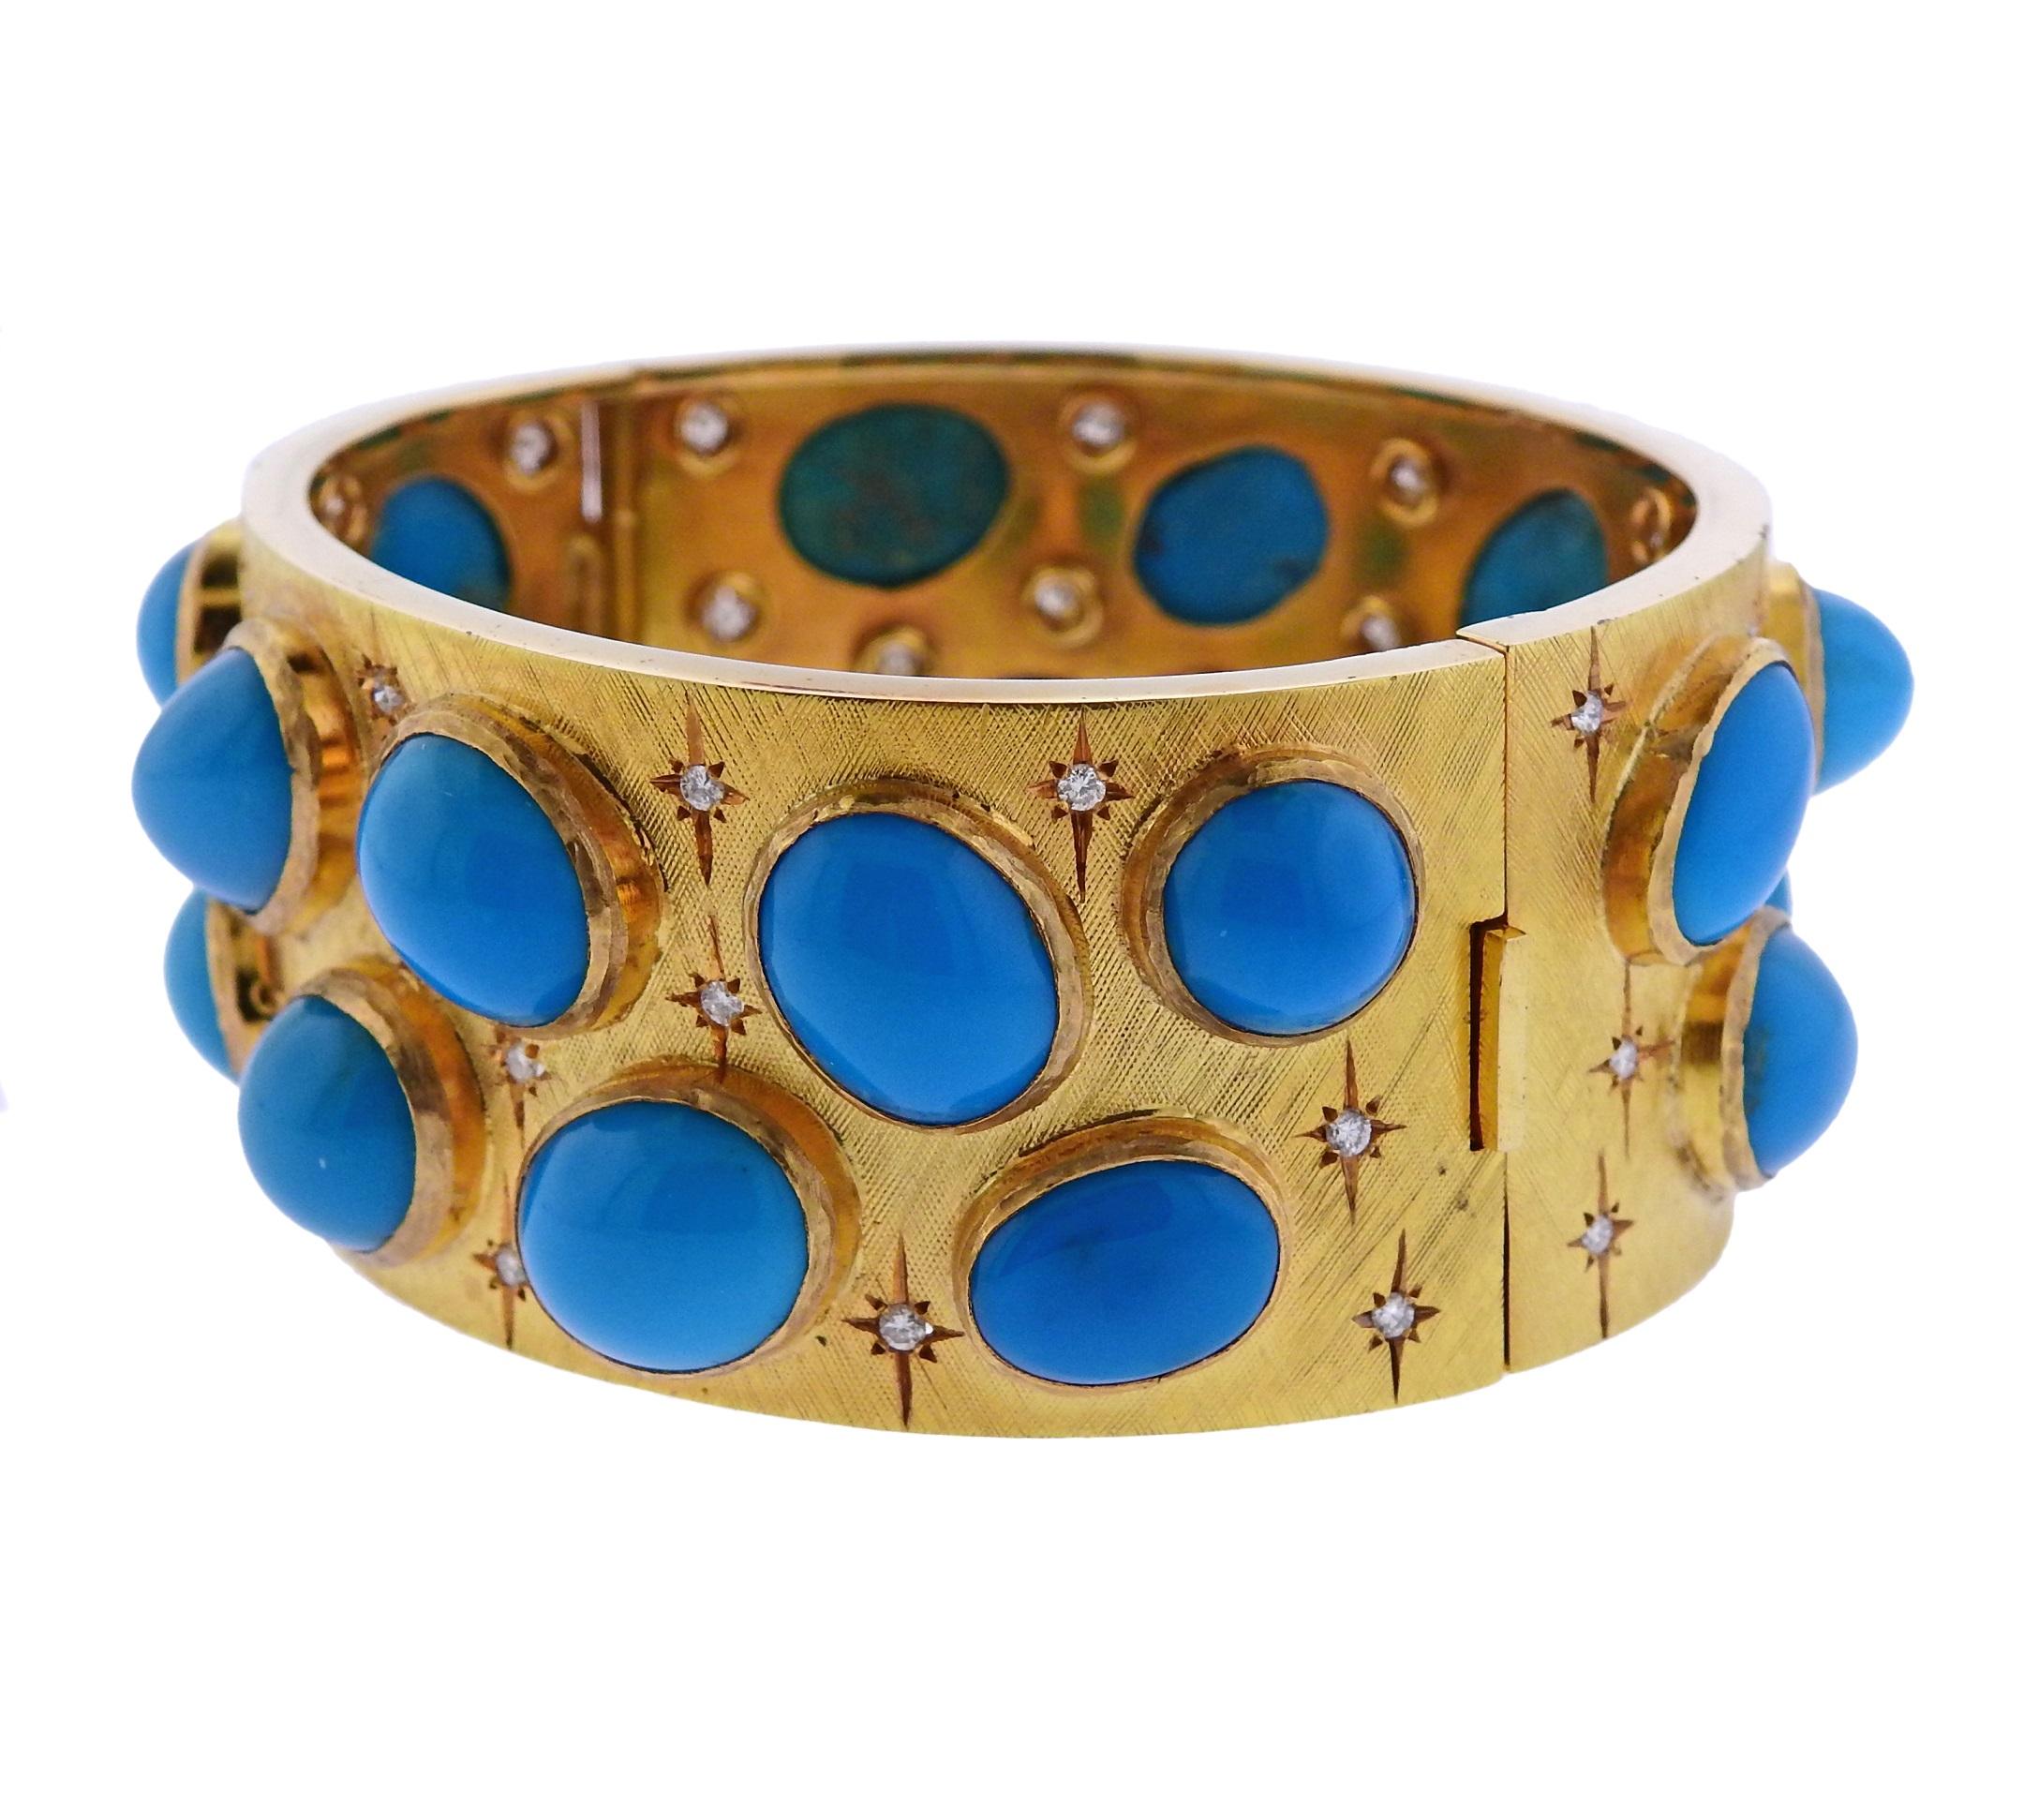 18k yellow gold bangle bracelet, decorated with turquoise gemstones and approximately 1.00ctw in GH/VS diamonds. 18k yellow gold bangle bracelet, decorated with turquoise gemstones and approximately 1.00ctw in GH/VS diamonds.  Bracelet will fit